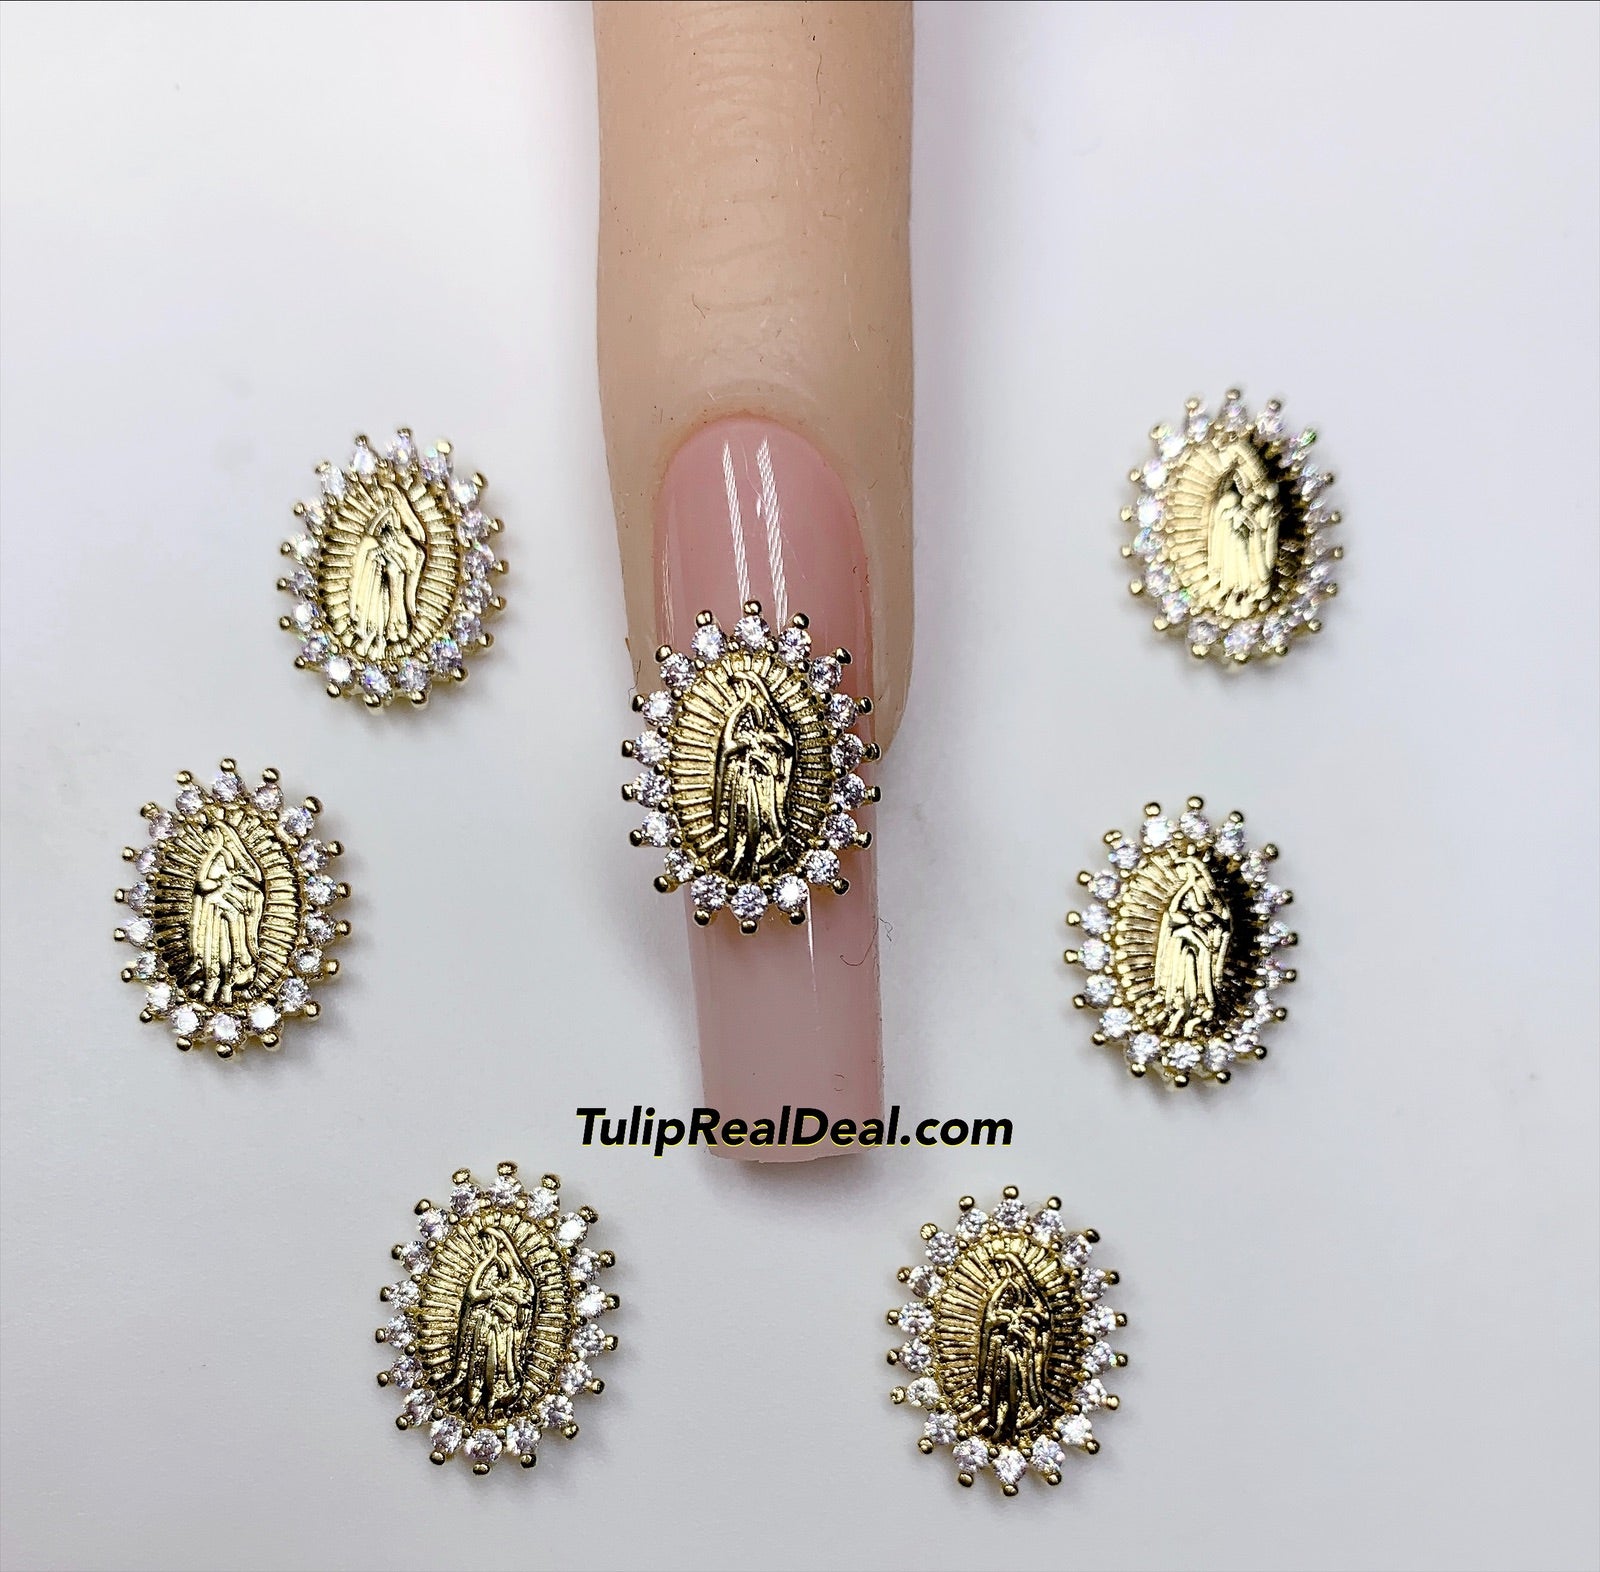 Bling Cross Virgin Mary Guadalupe 3D Nail Charm 10 Pieces